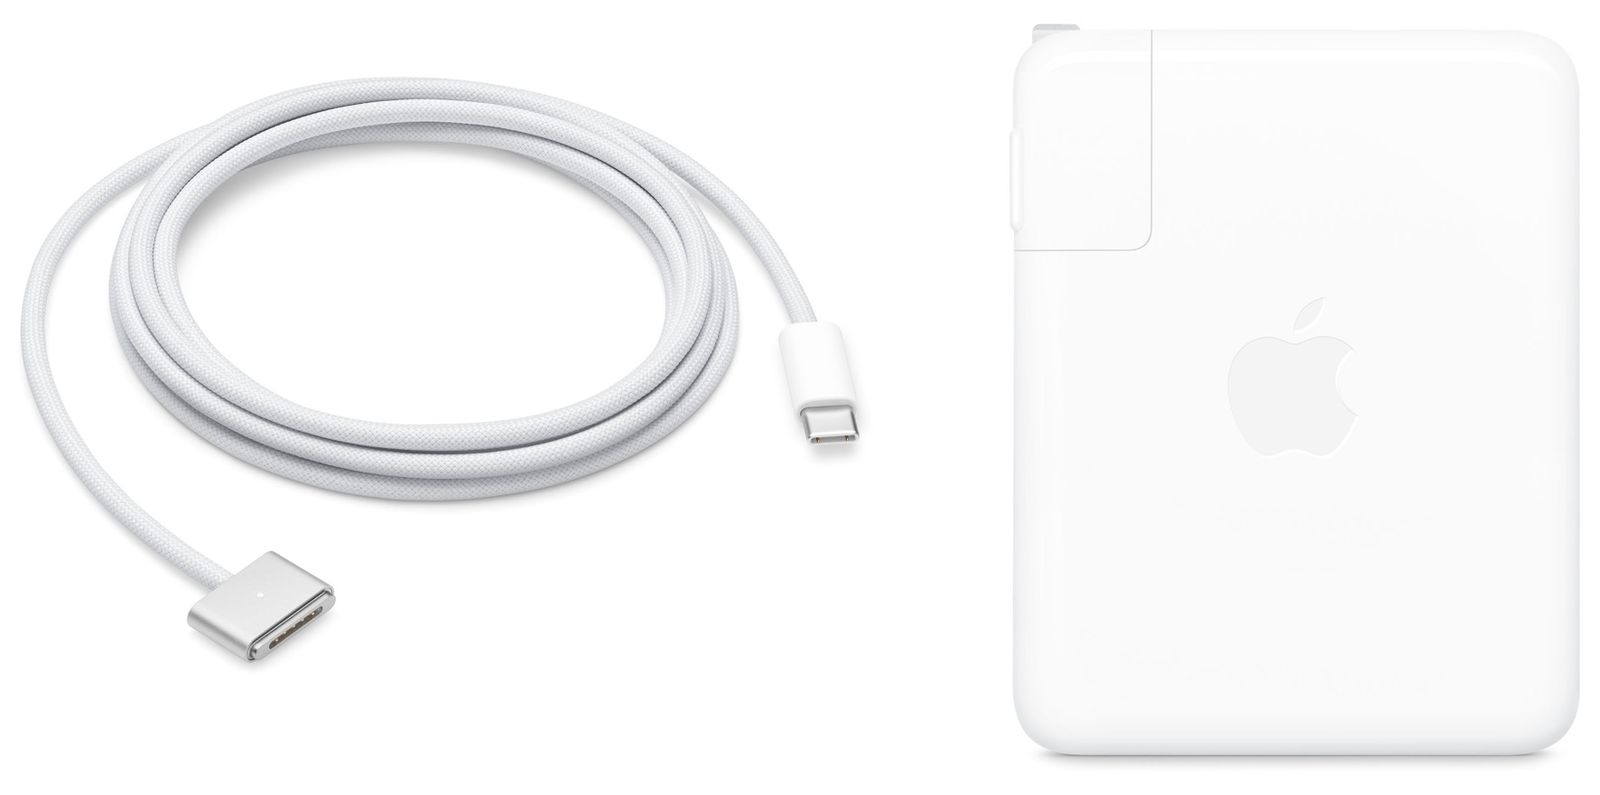 Apple Lists MagSafe Cable in Four Colors for MacBook Air and MacBook Pro  for $49 - MacRumors